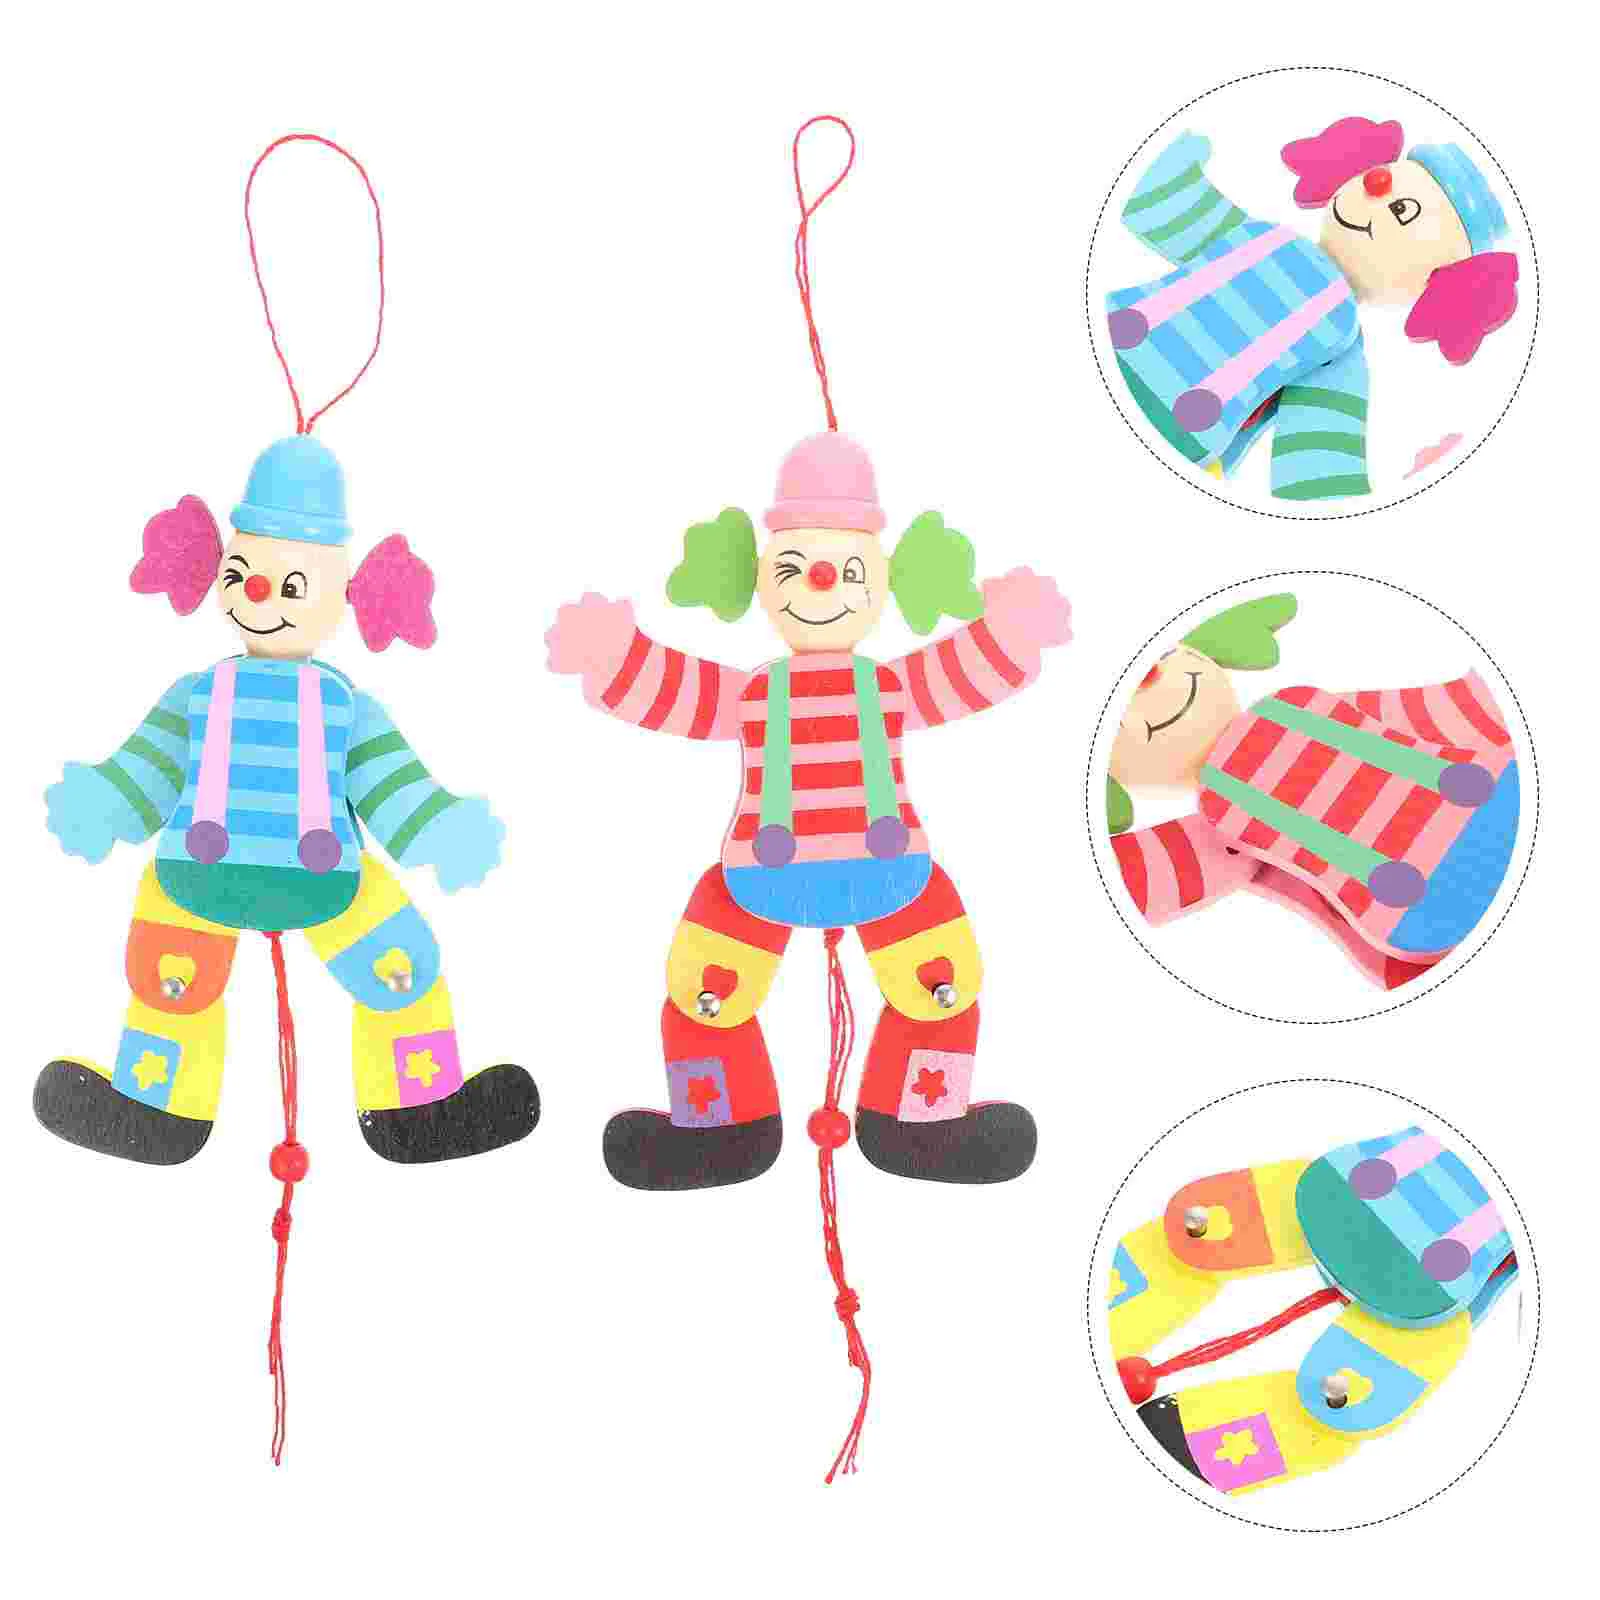 

Pull Line Clown Toy Wooden Marionettes Funny Toys Puppet Show Hand Puppets Adults Interactive Supplies Childrens Theater